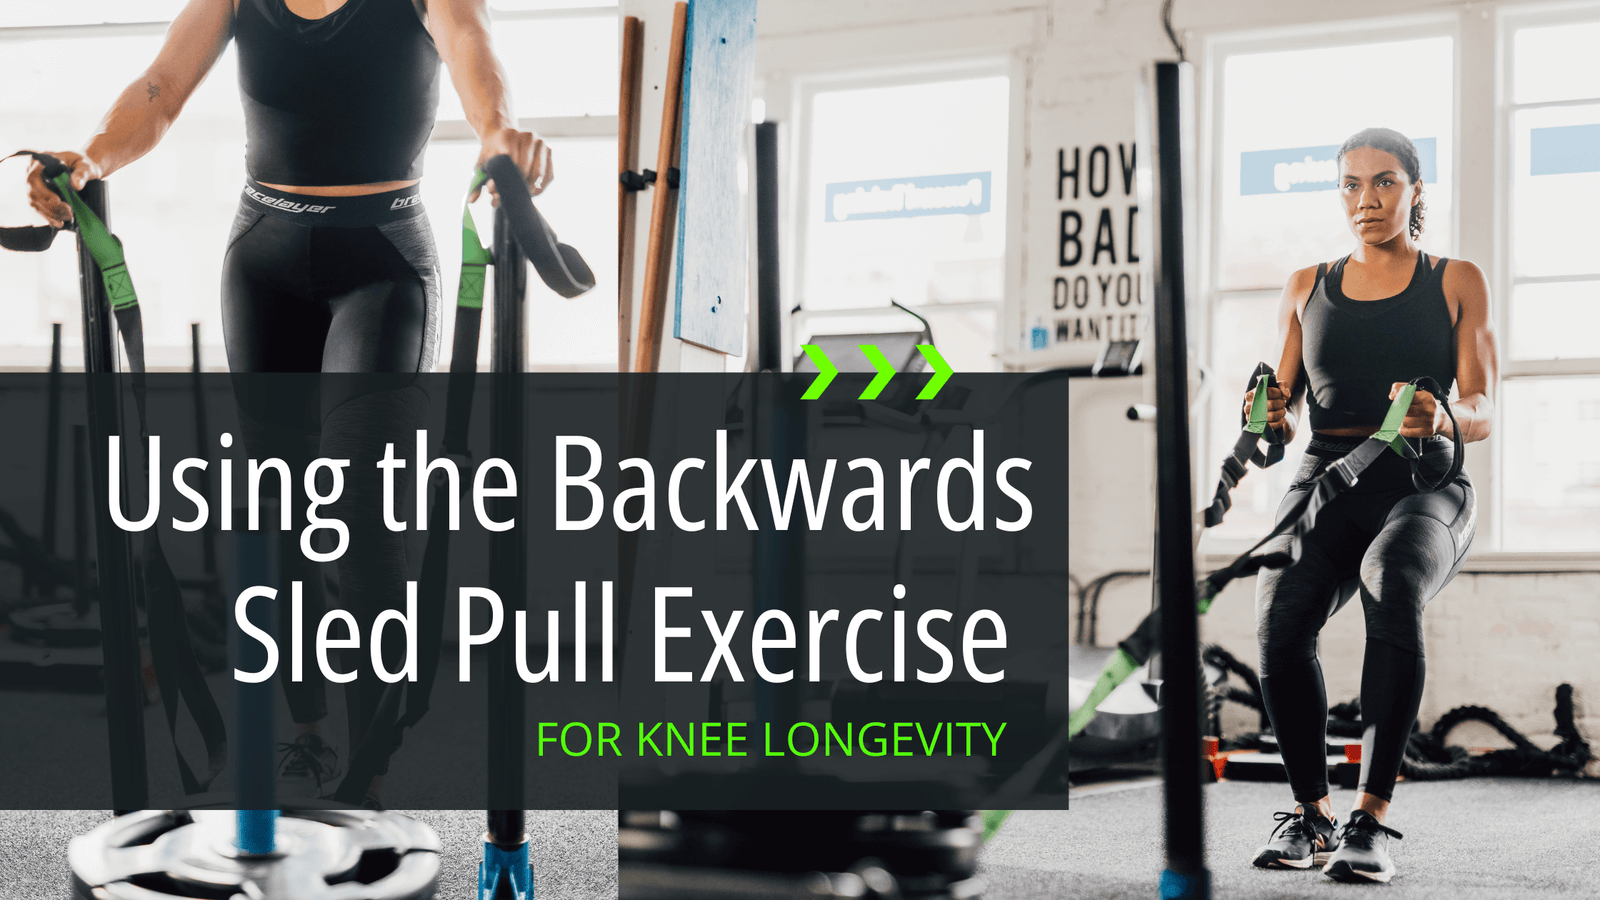 Backwards Sled Pull for Knee Longevity graphic header by Bracelayer® USA | Knee Compression Gear, Sled pull muscles worked, knee pulls, strengthening knees, sled pull.